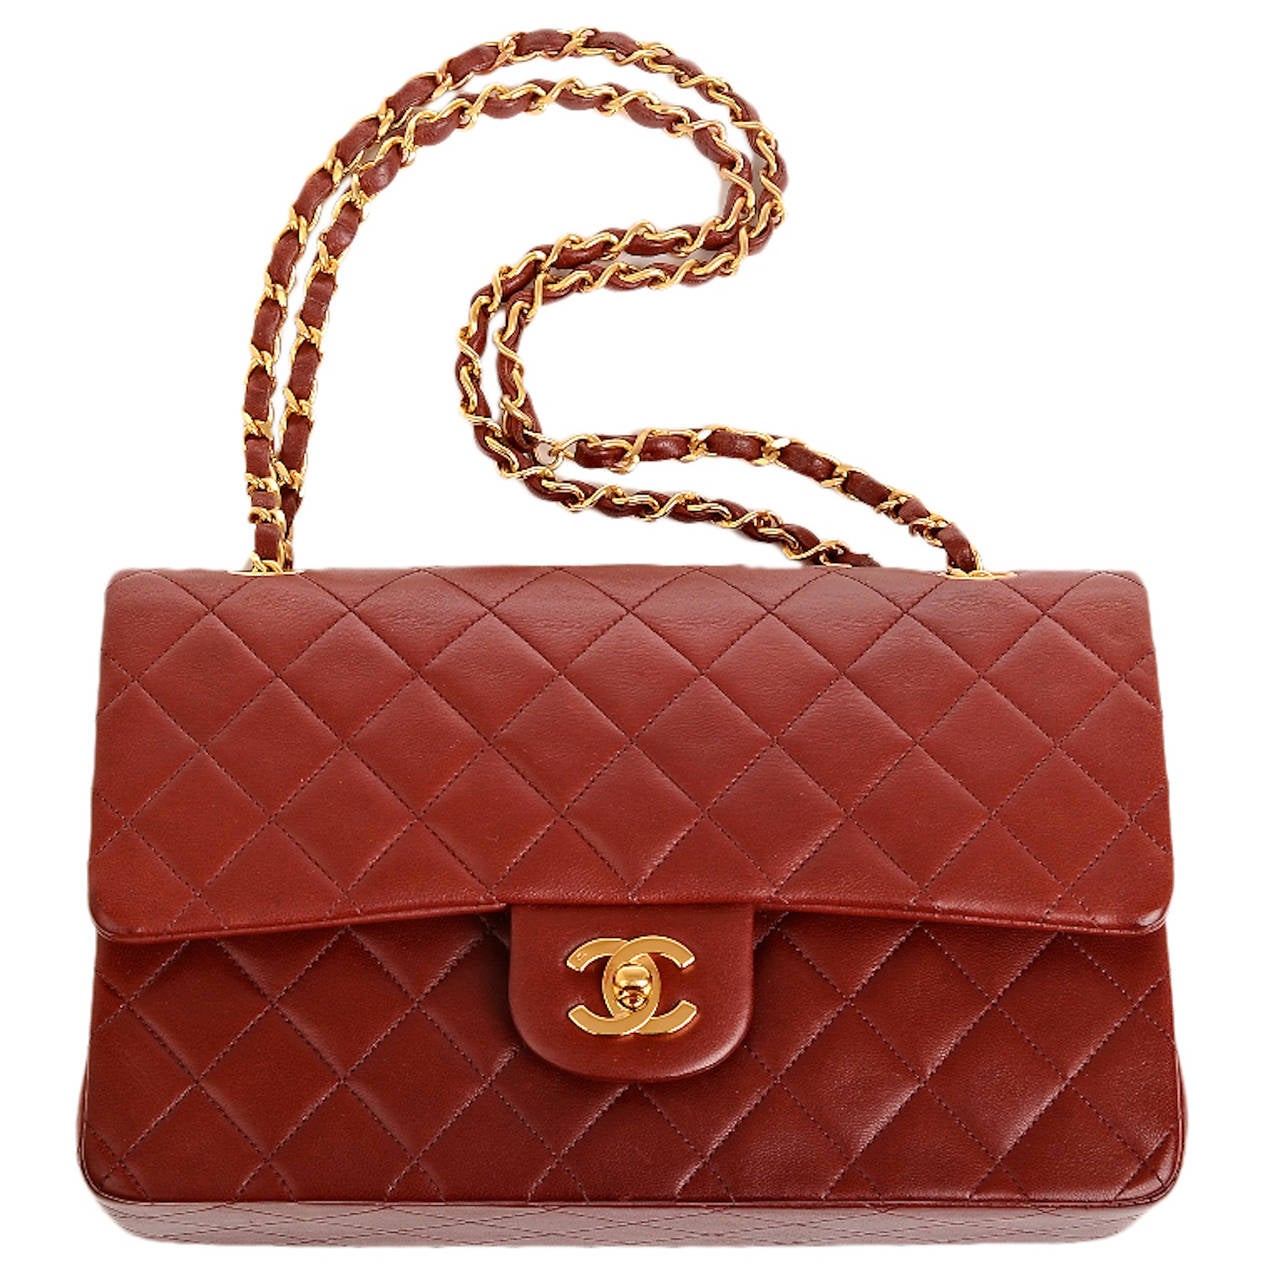 Chanel Vintage Dark Red Lambskin Large Classic Double Flap Bag 3